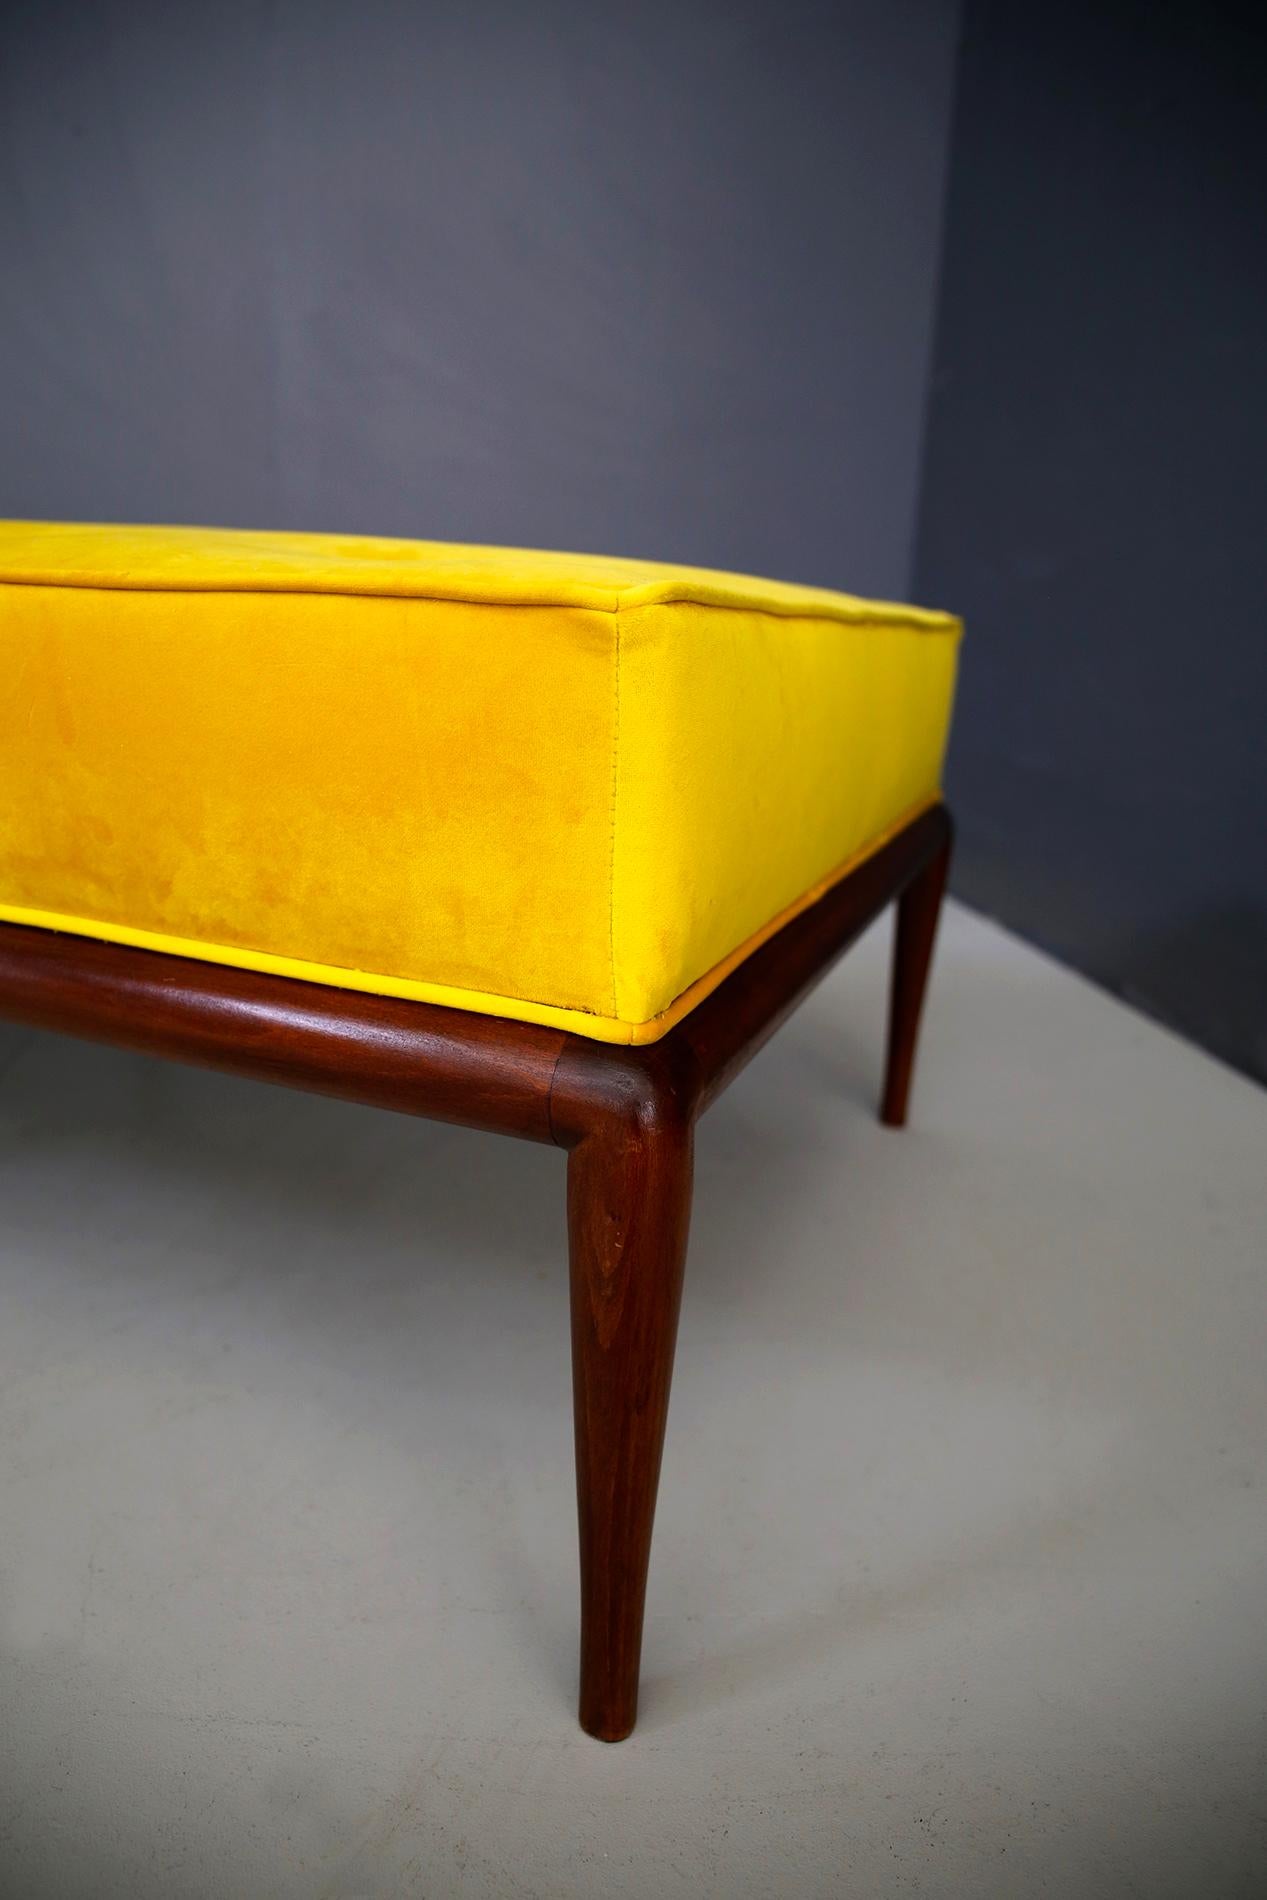 Daybed designed by T.H. Robsjohn-Gibbings, circa 1950. The bench has been restored and covered in yellow velvet with button insertion. The structure of the bench is in walnut. The bench is ideal for complete relaxation in the lounge area or to